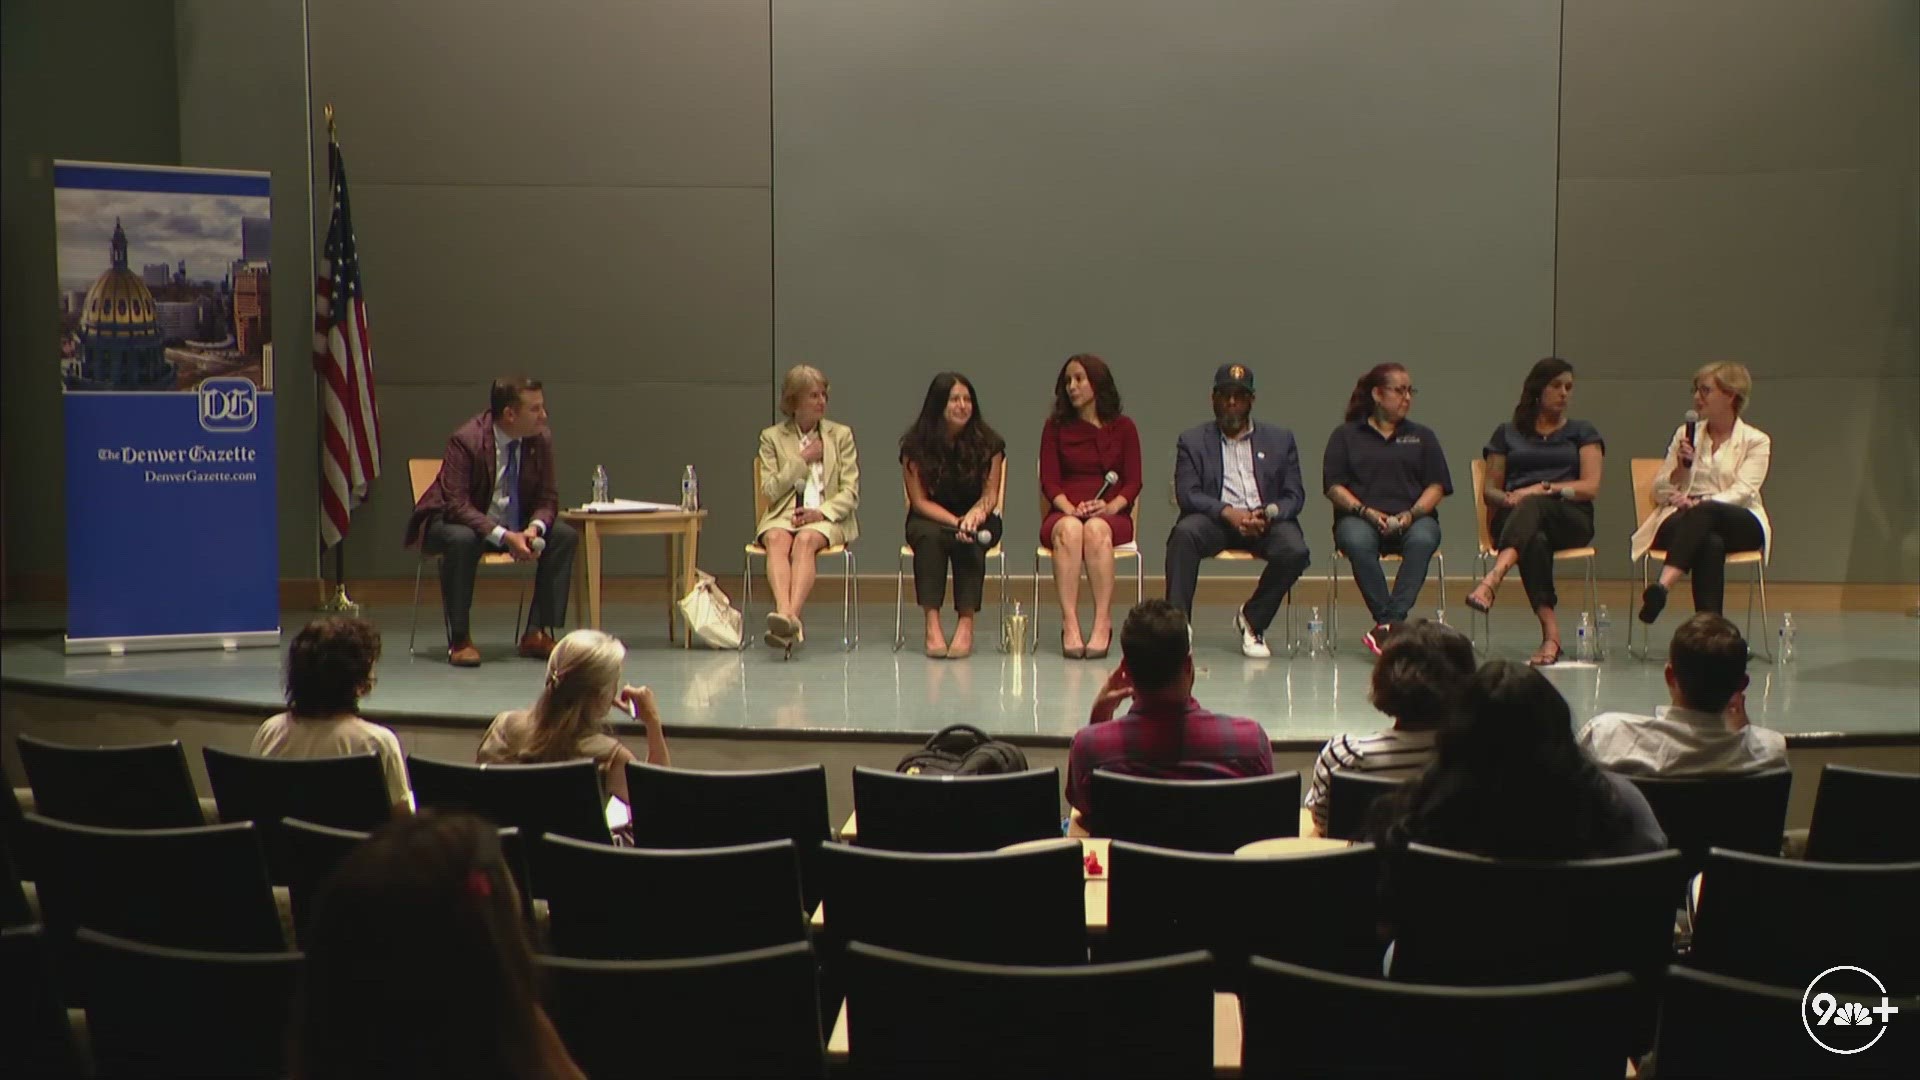 Tuesday, the Denver Gazette and 9NEWS teamed up for a town hall discussion to help find solutions to youth violence in Colorado.